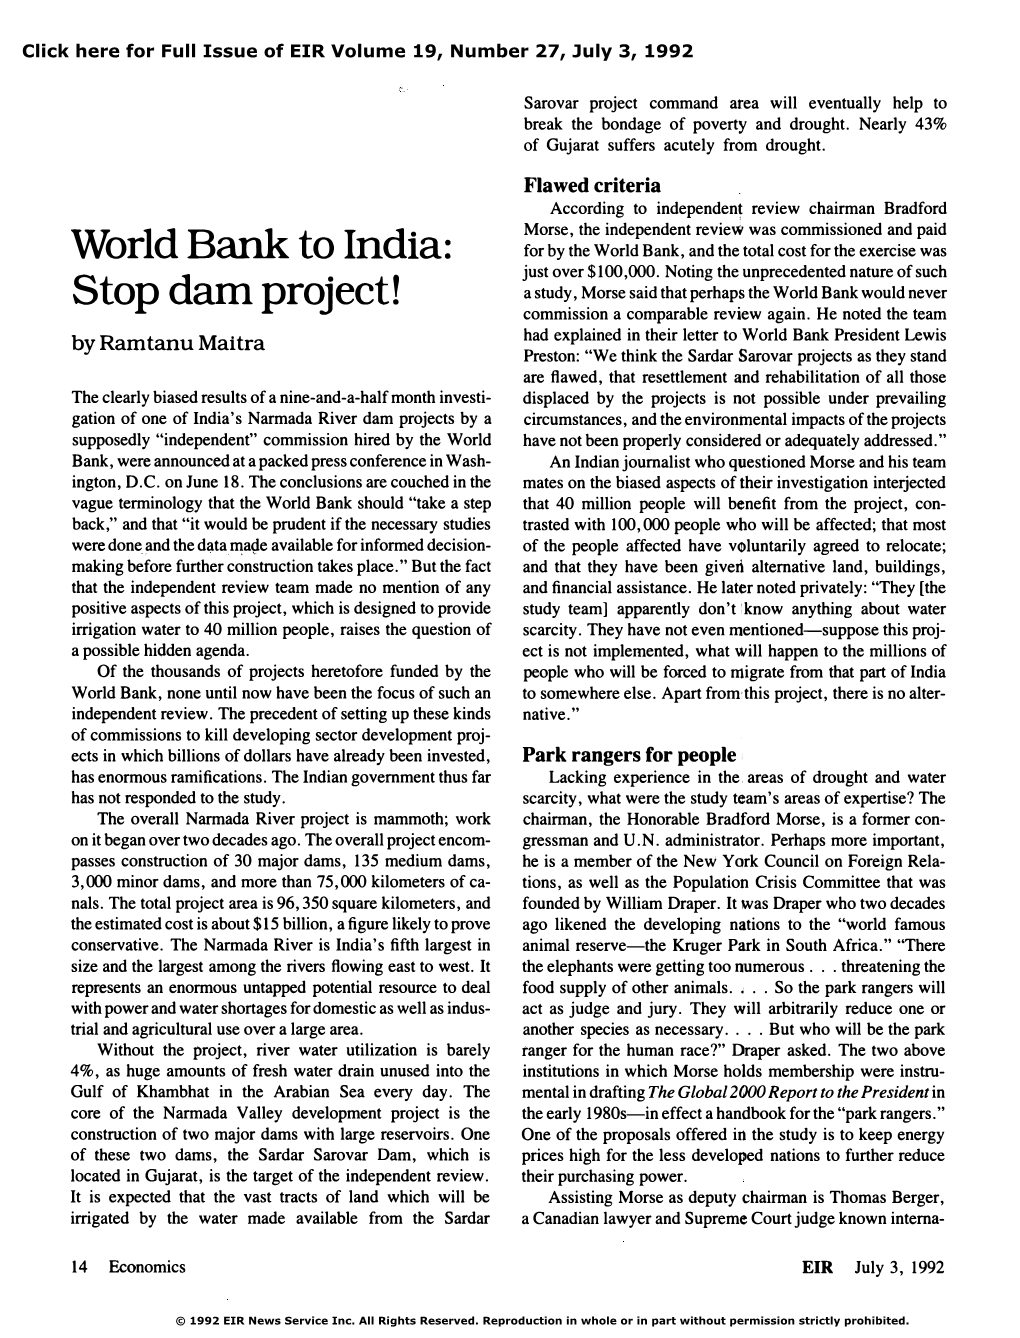 World Bank to India: Stop Dam Project!